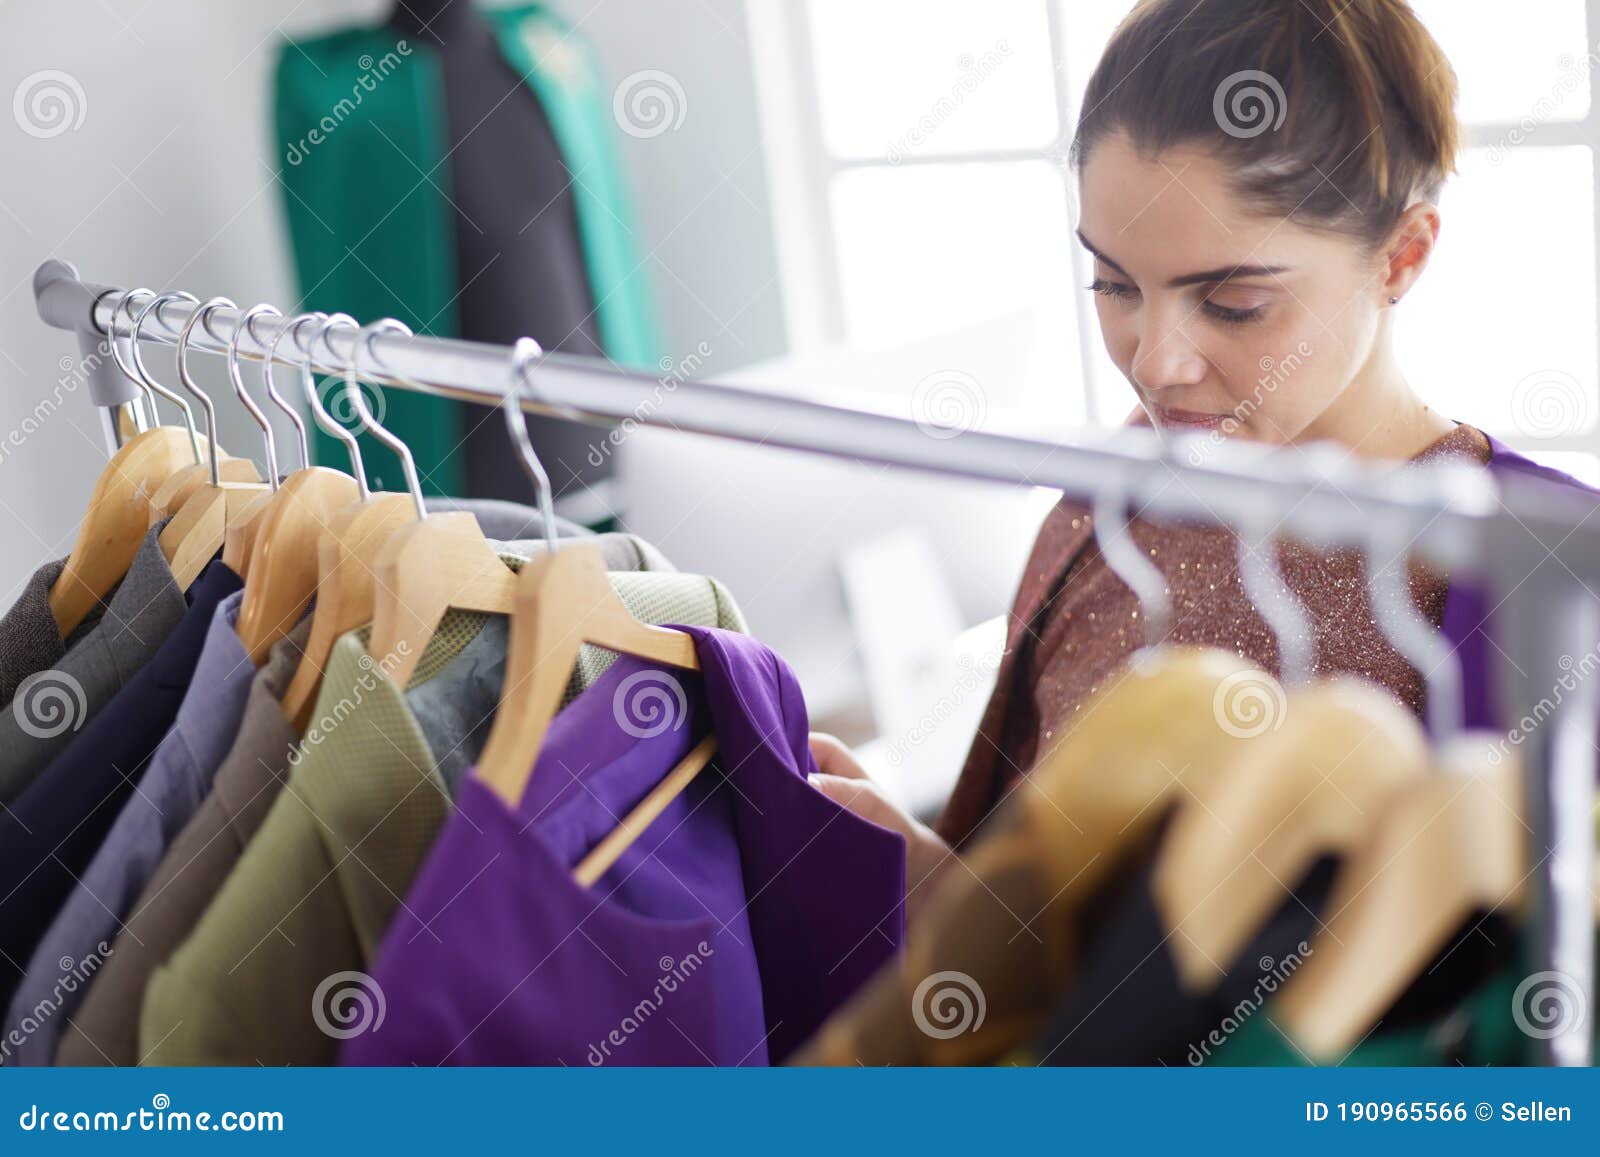 Beautiful Young Stylist Near Rack with Hangers Stock Photo - Image of ...